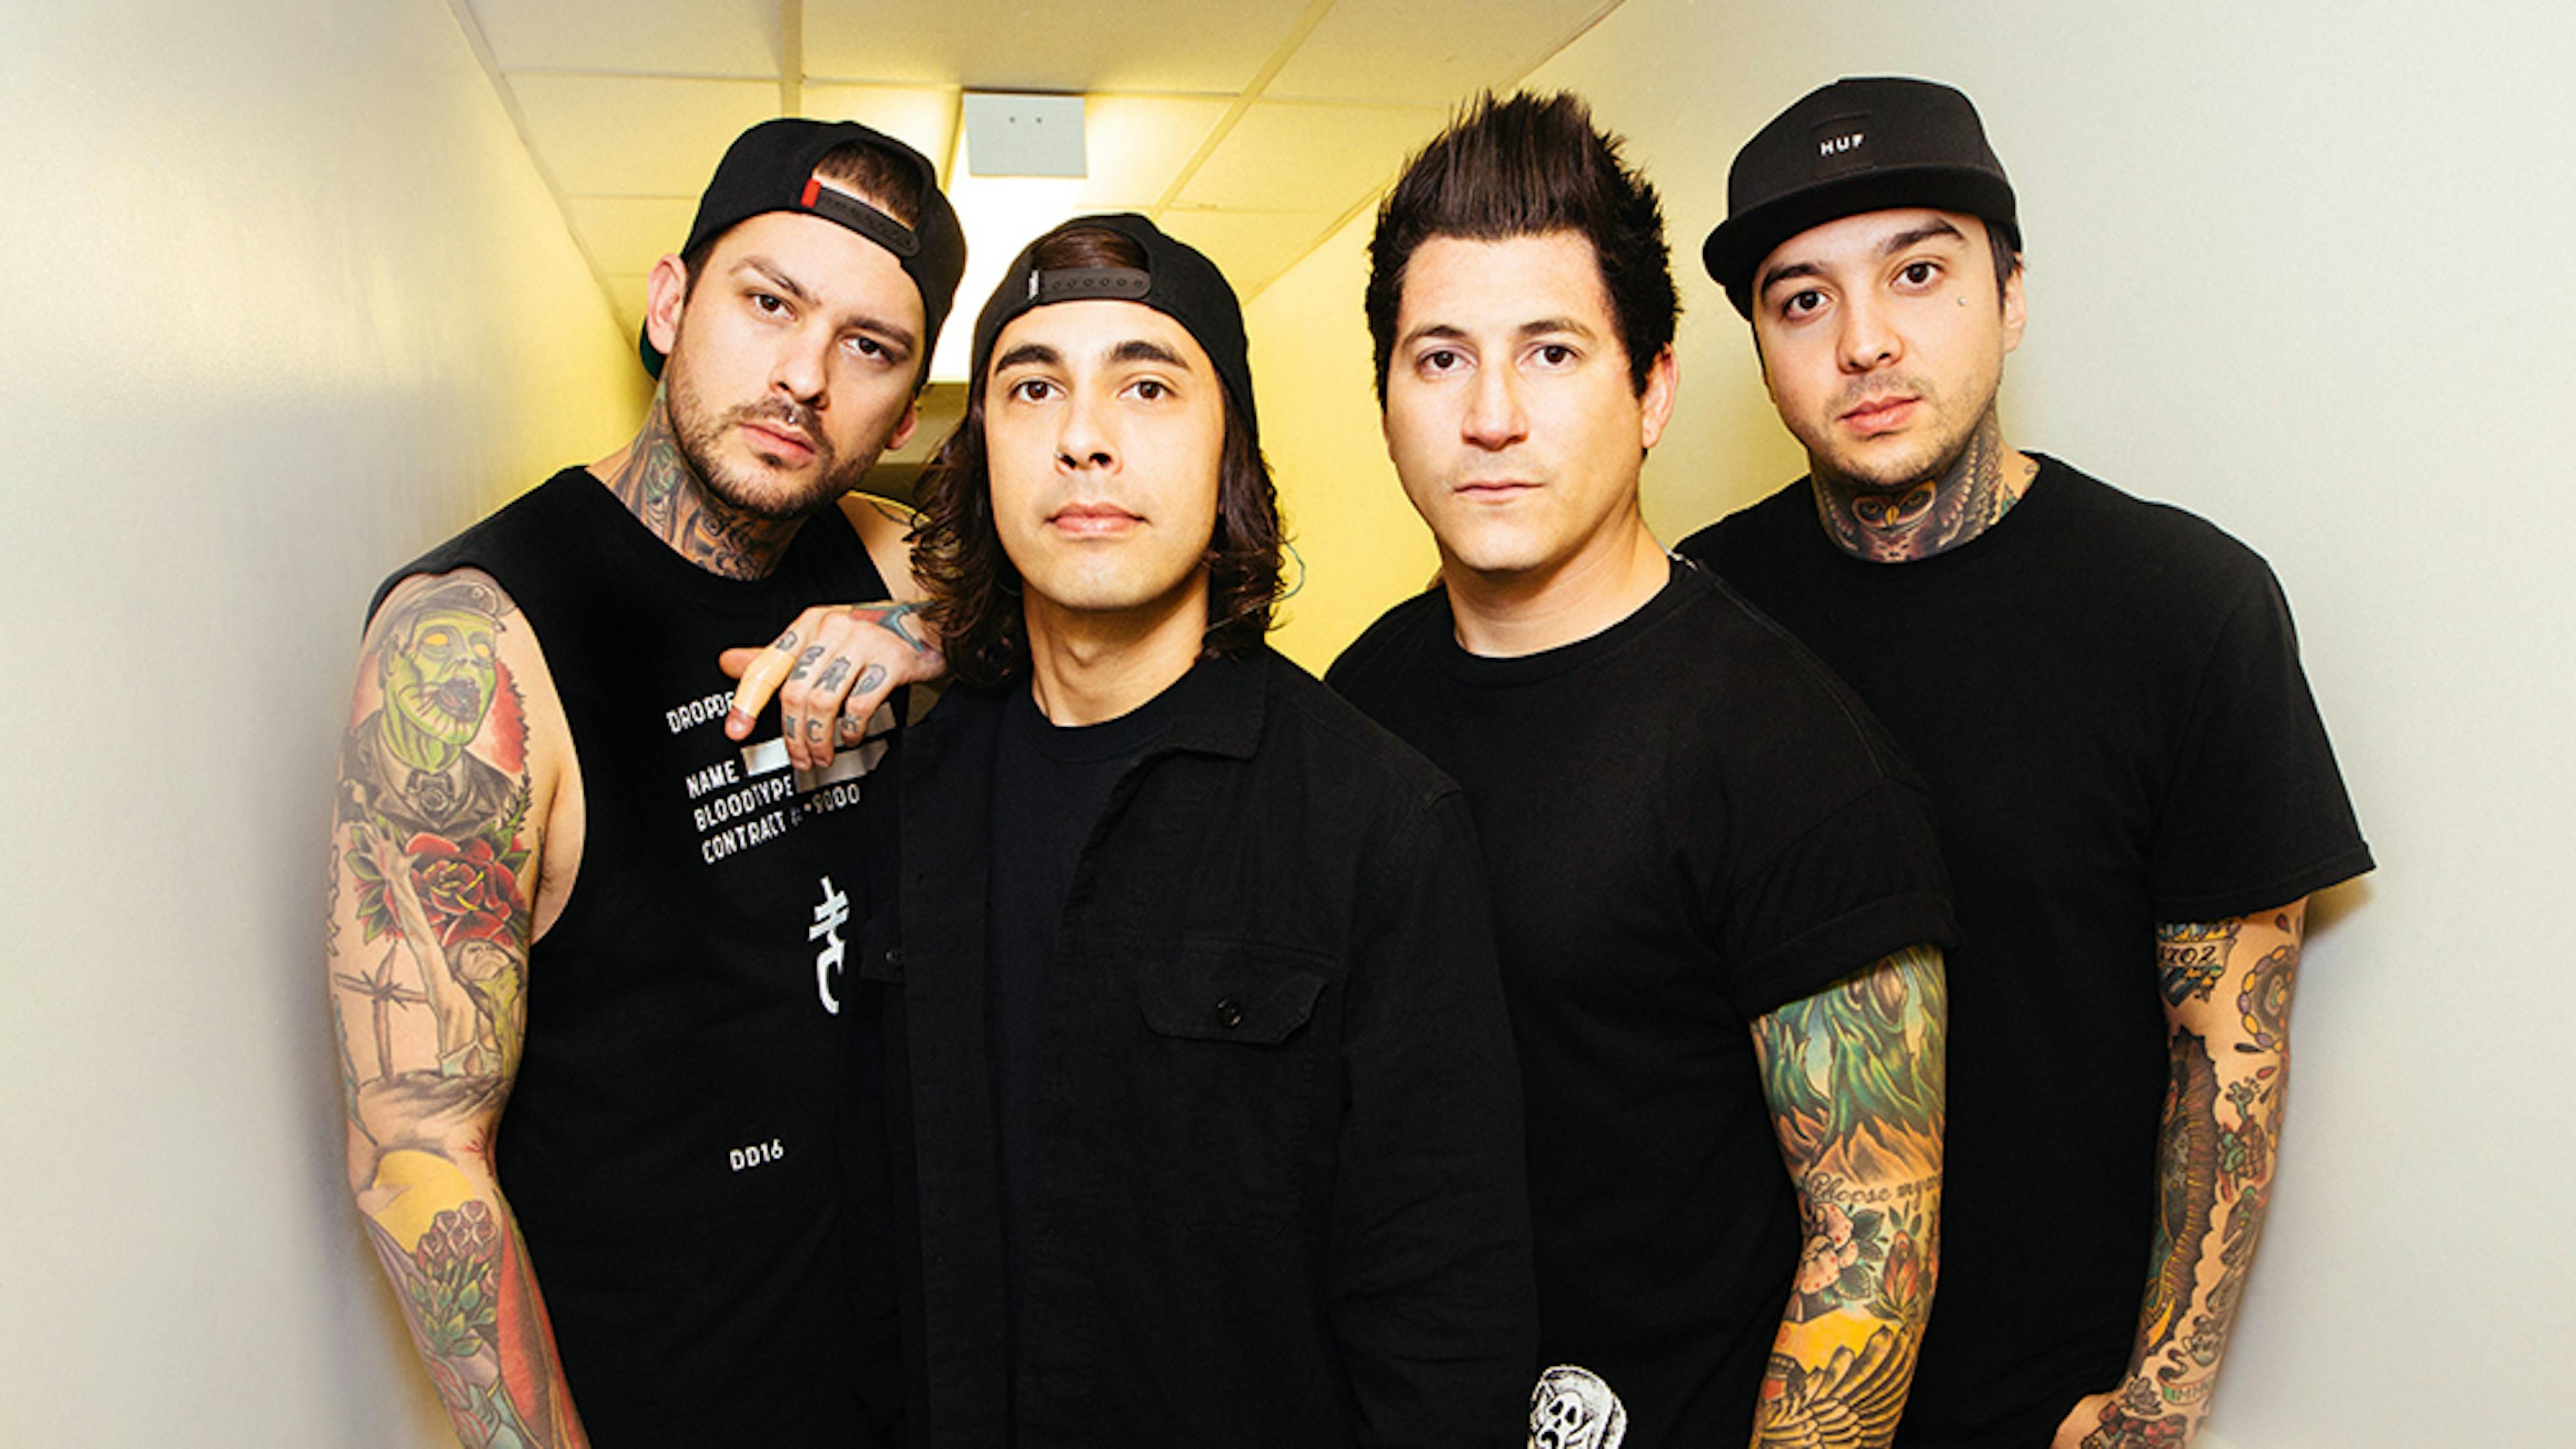 The New Pierce The Veil Album Is "Getting Closer And Closer"